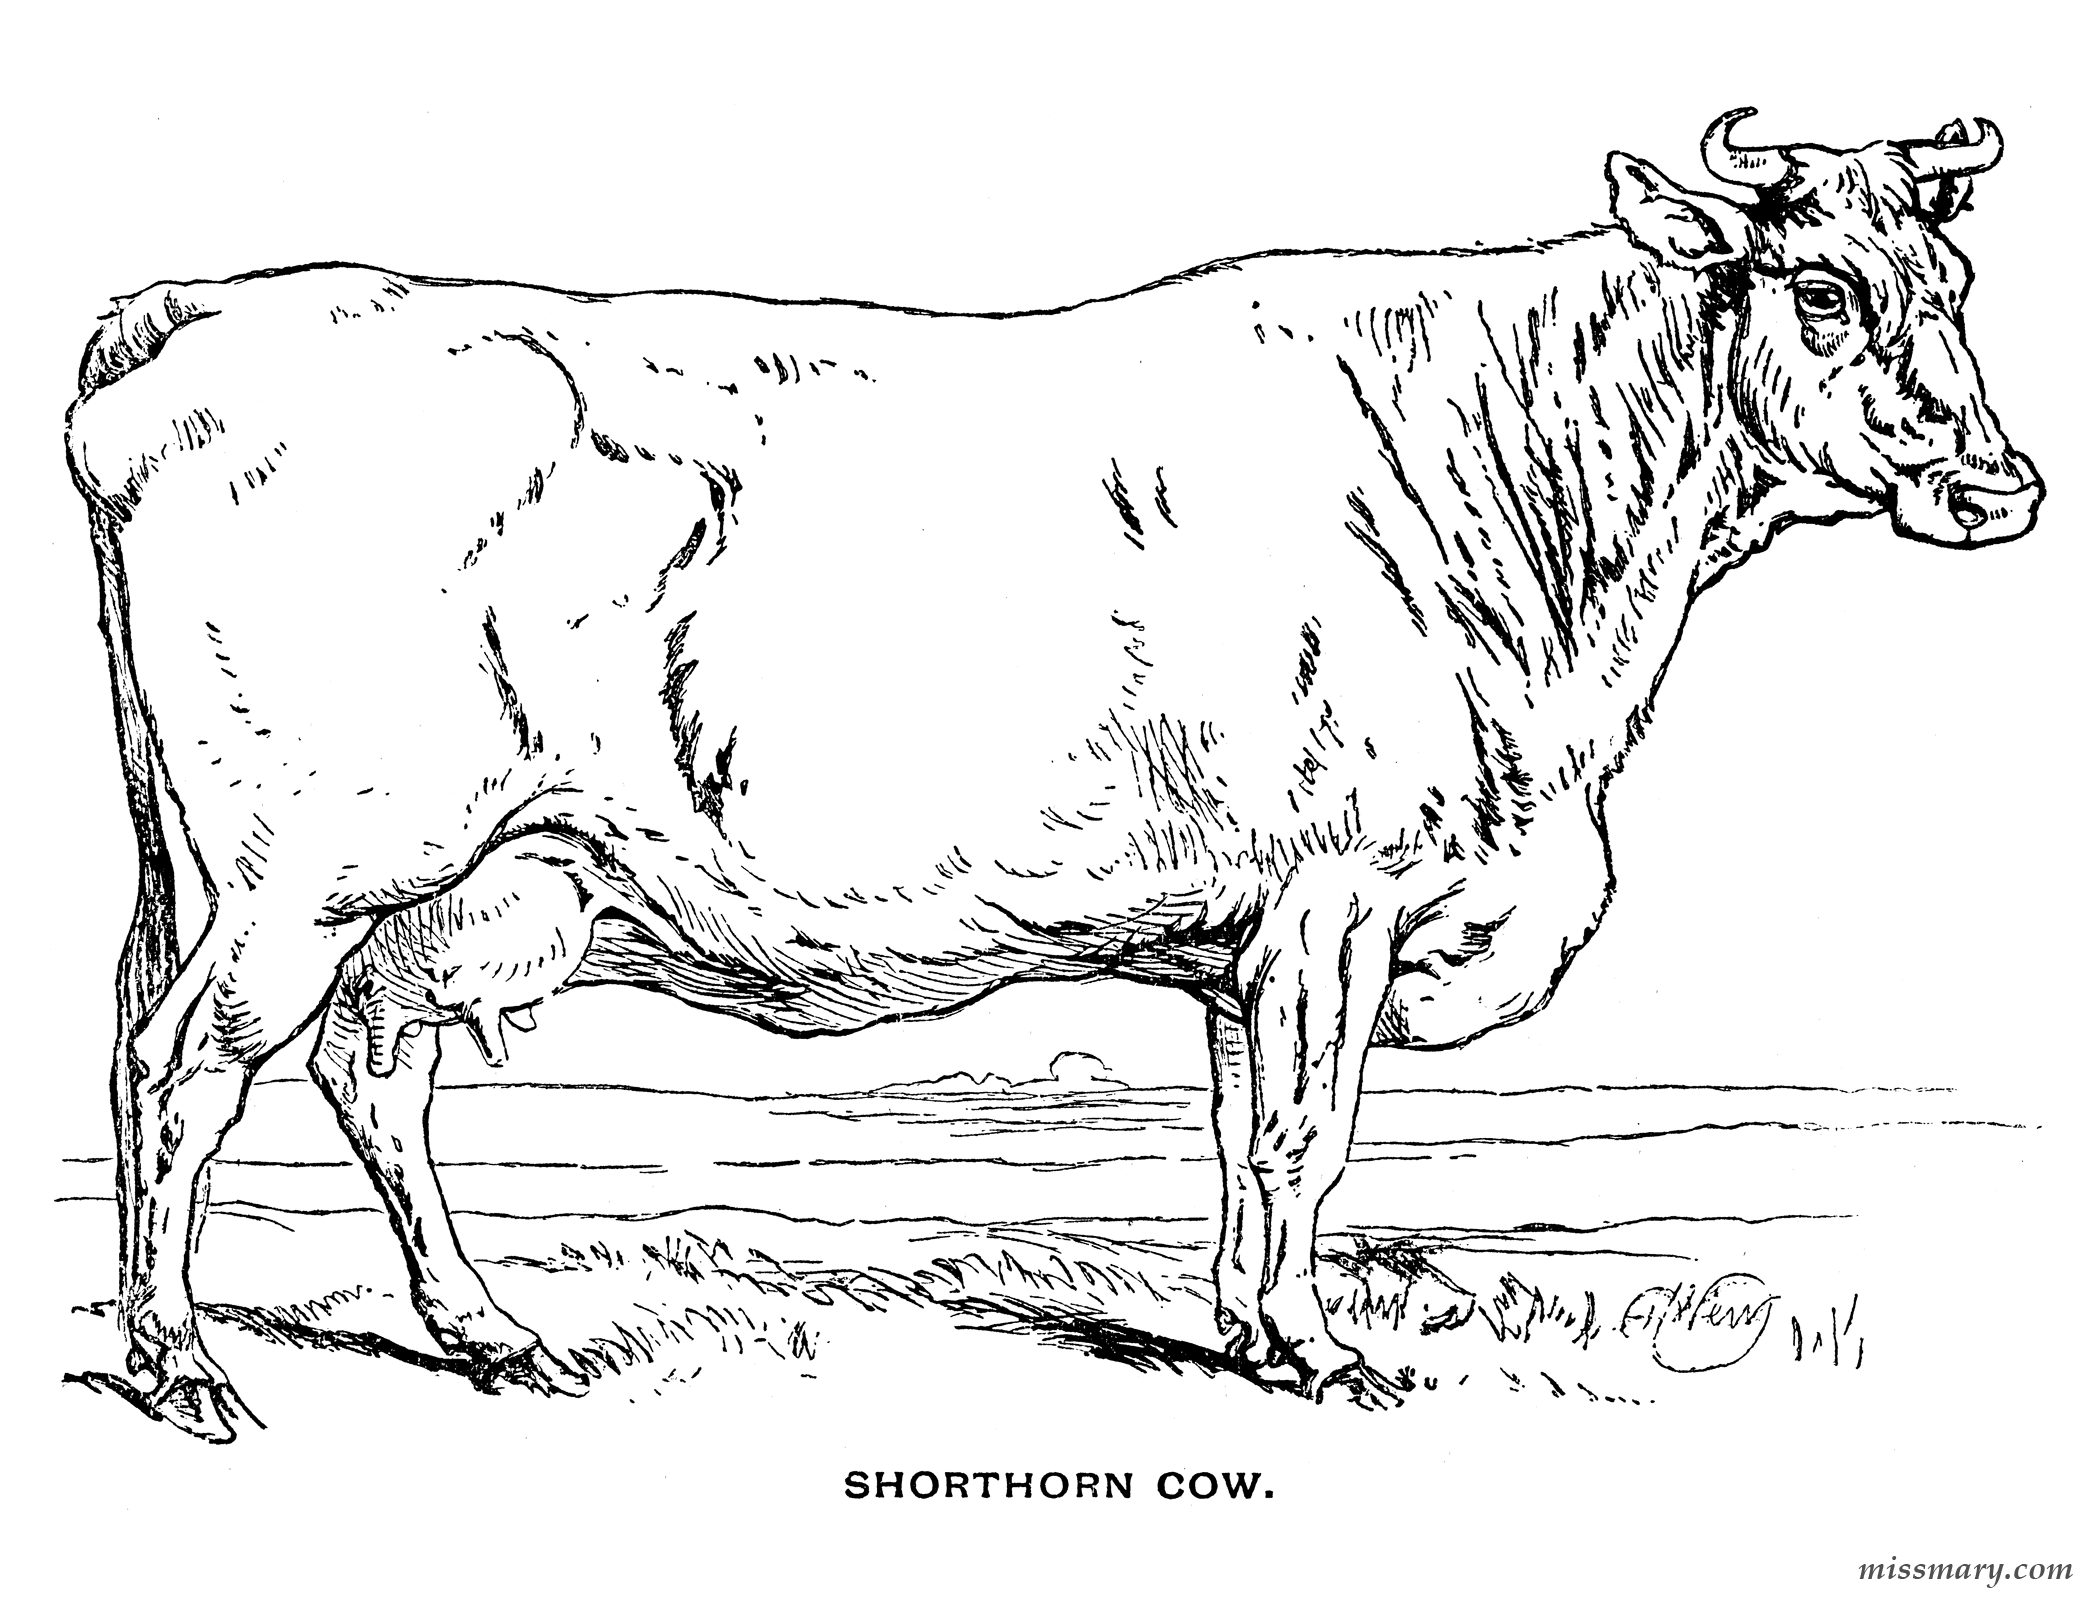 Shorthorn Cow Coloring Page from an Antique Coloring Book - Miss ...